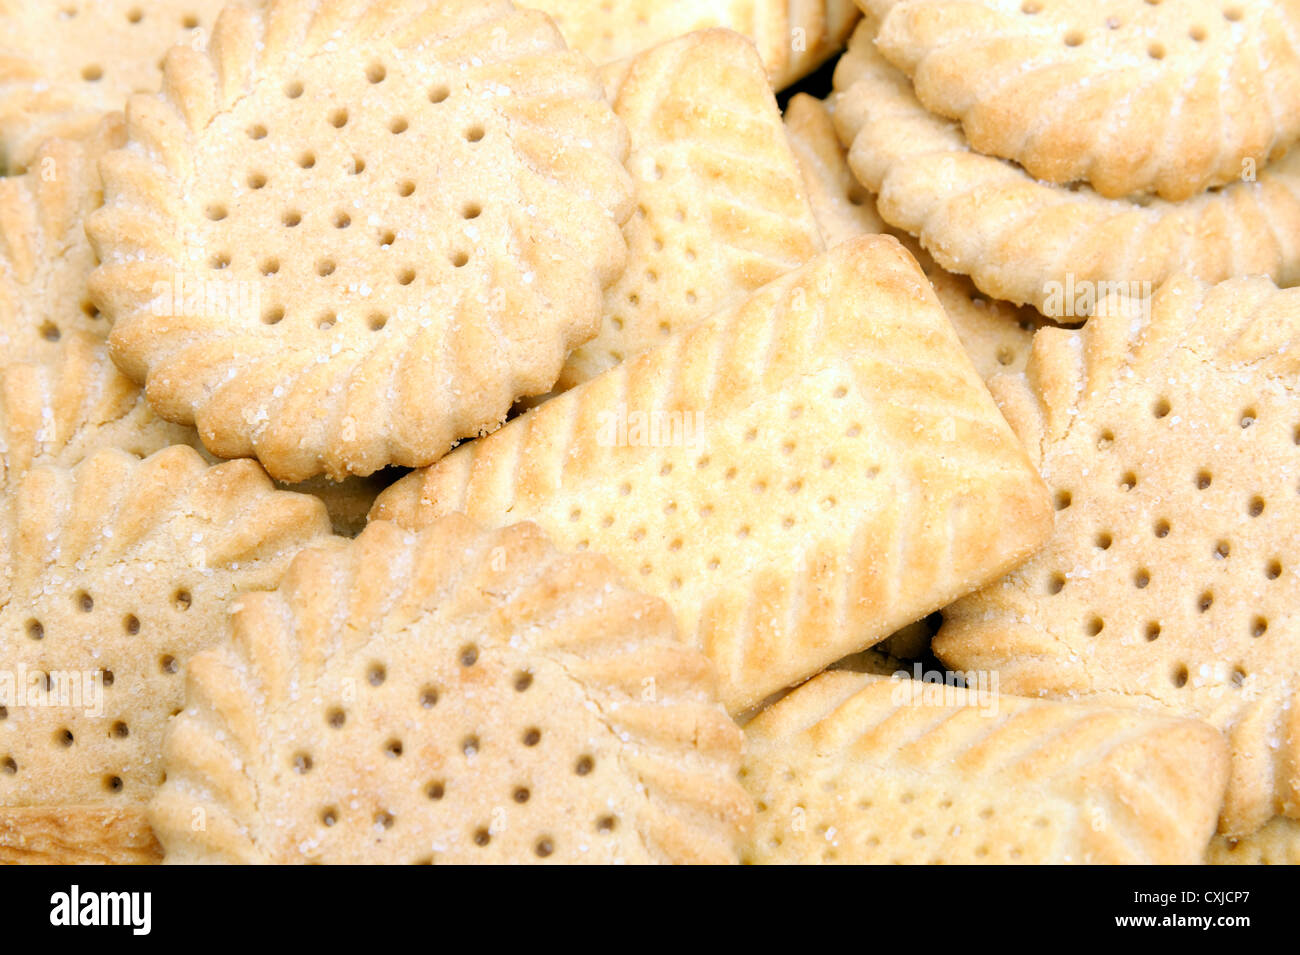 Shortbread Biscuits High Resolution Stock Photography And Images Alamy,How To Clean A Front Load Washer That Smells